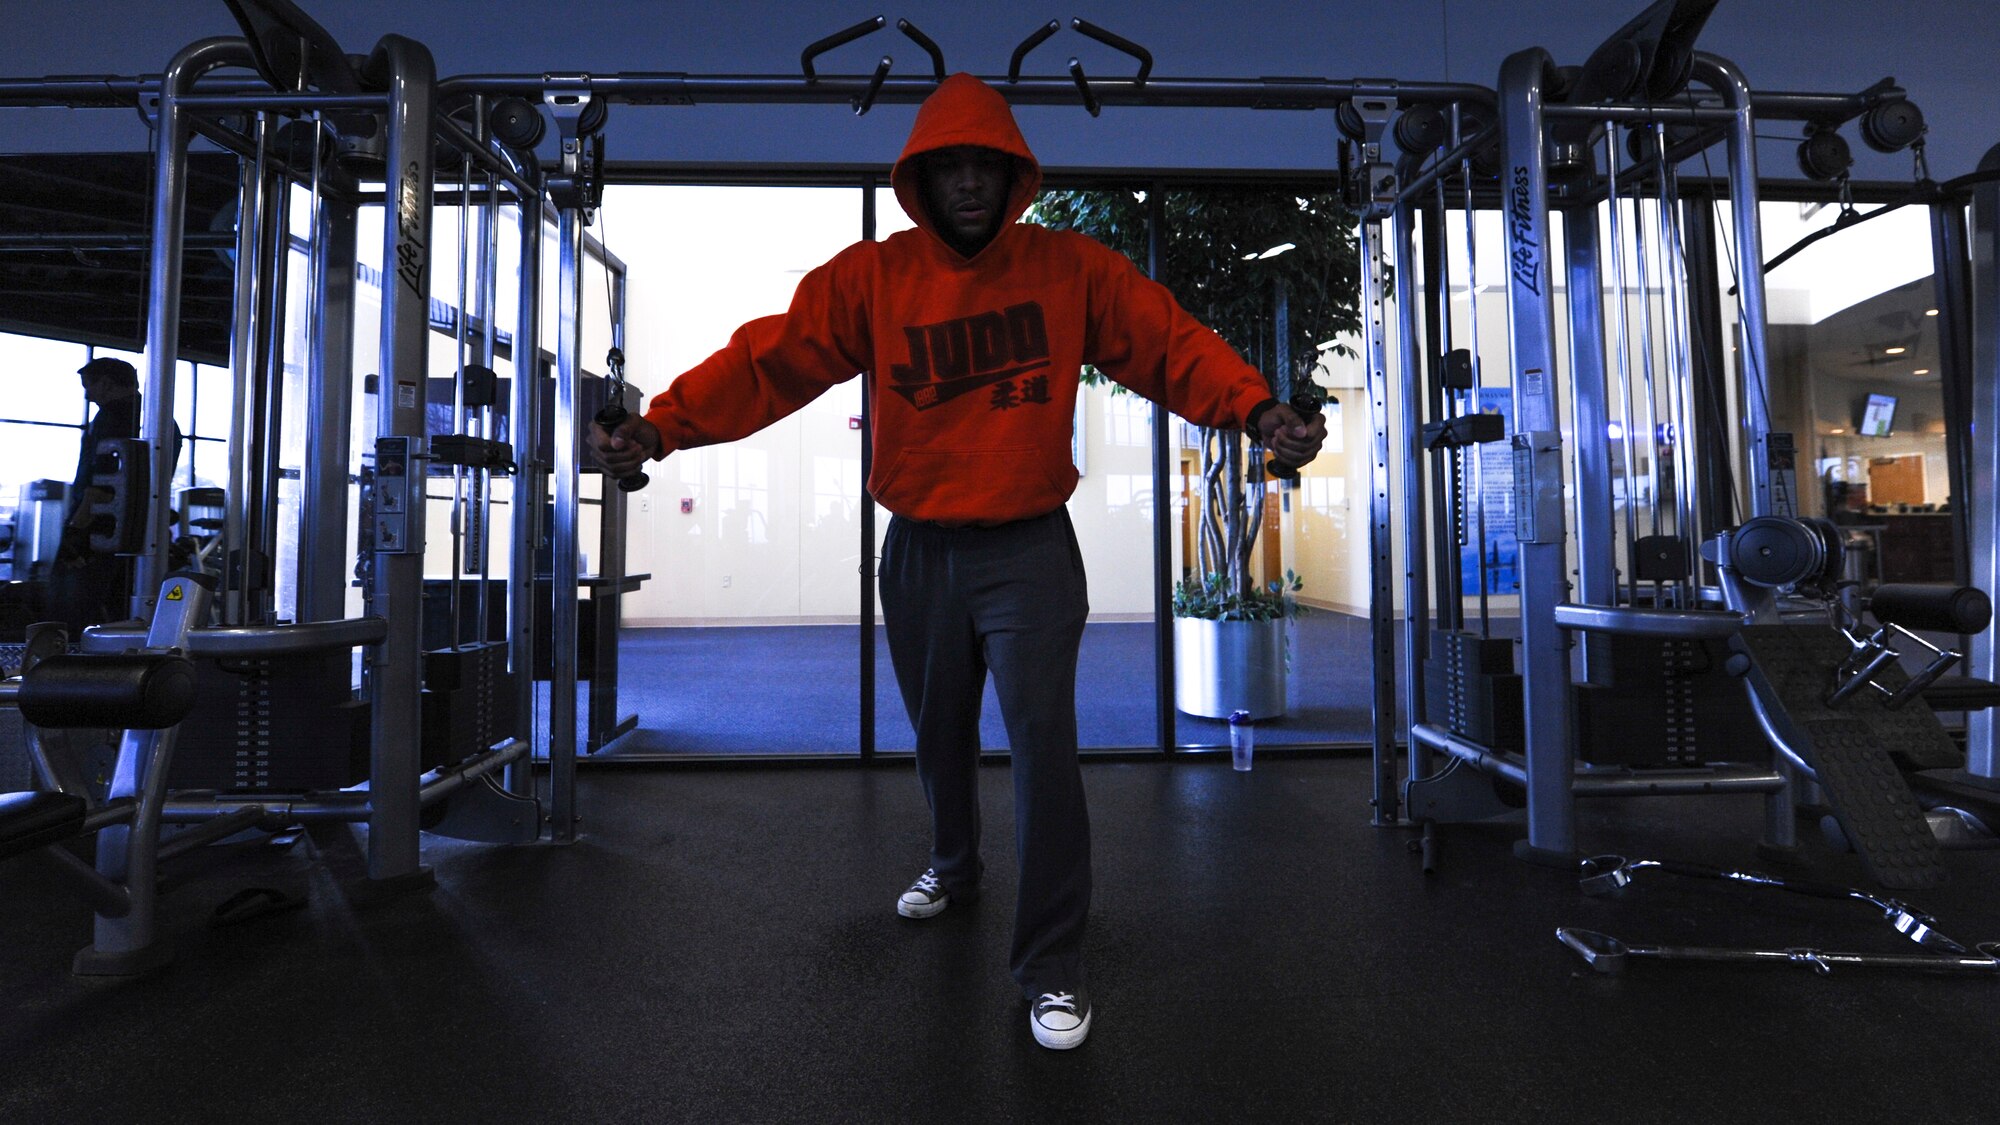 U.S. Air Force Staff Sgt. Keith DeBose, 19th Force Support Squadron Airman Leadership School instructor, does a cable chest-fly at the Fitness Center Jan. 6, 2016, at Little Rock Air Force Base, Ark. In addition to a weight room, the Fitness Center has an aerobics and cardiovascular room. (U.S. Air Force photo by Airman 1st Class Mercedes Taylor) 